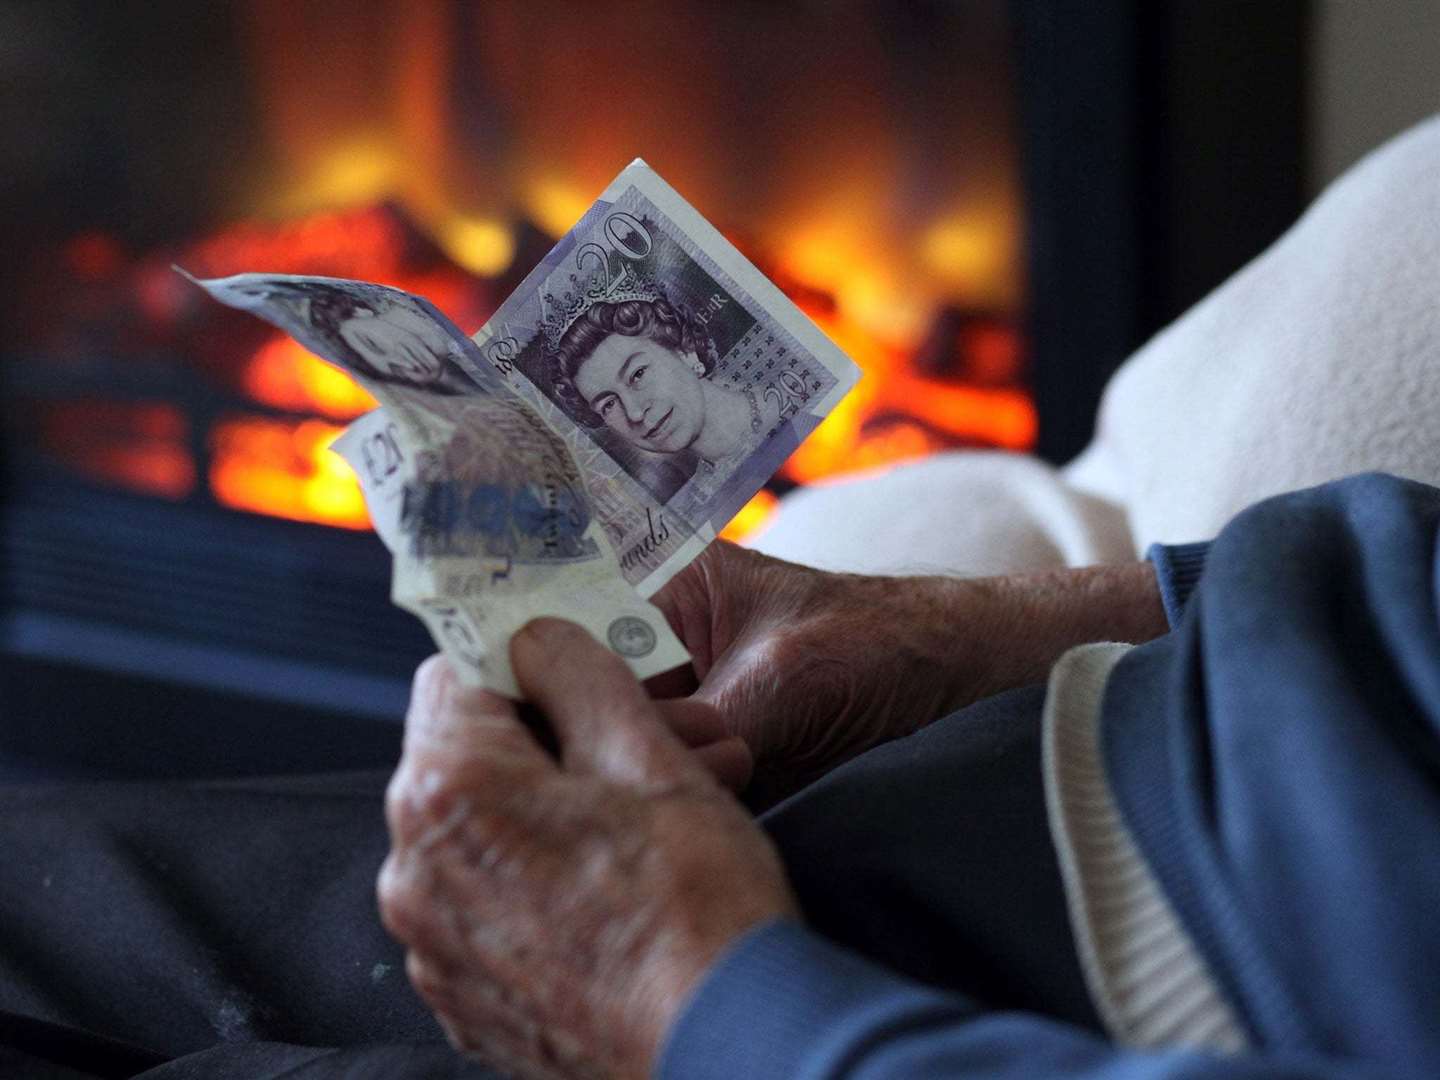 Fuel poverty is a real concern with the Highlands one of the worst off areas in the UK.